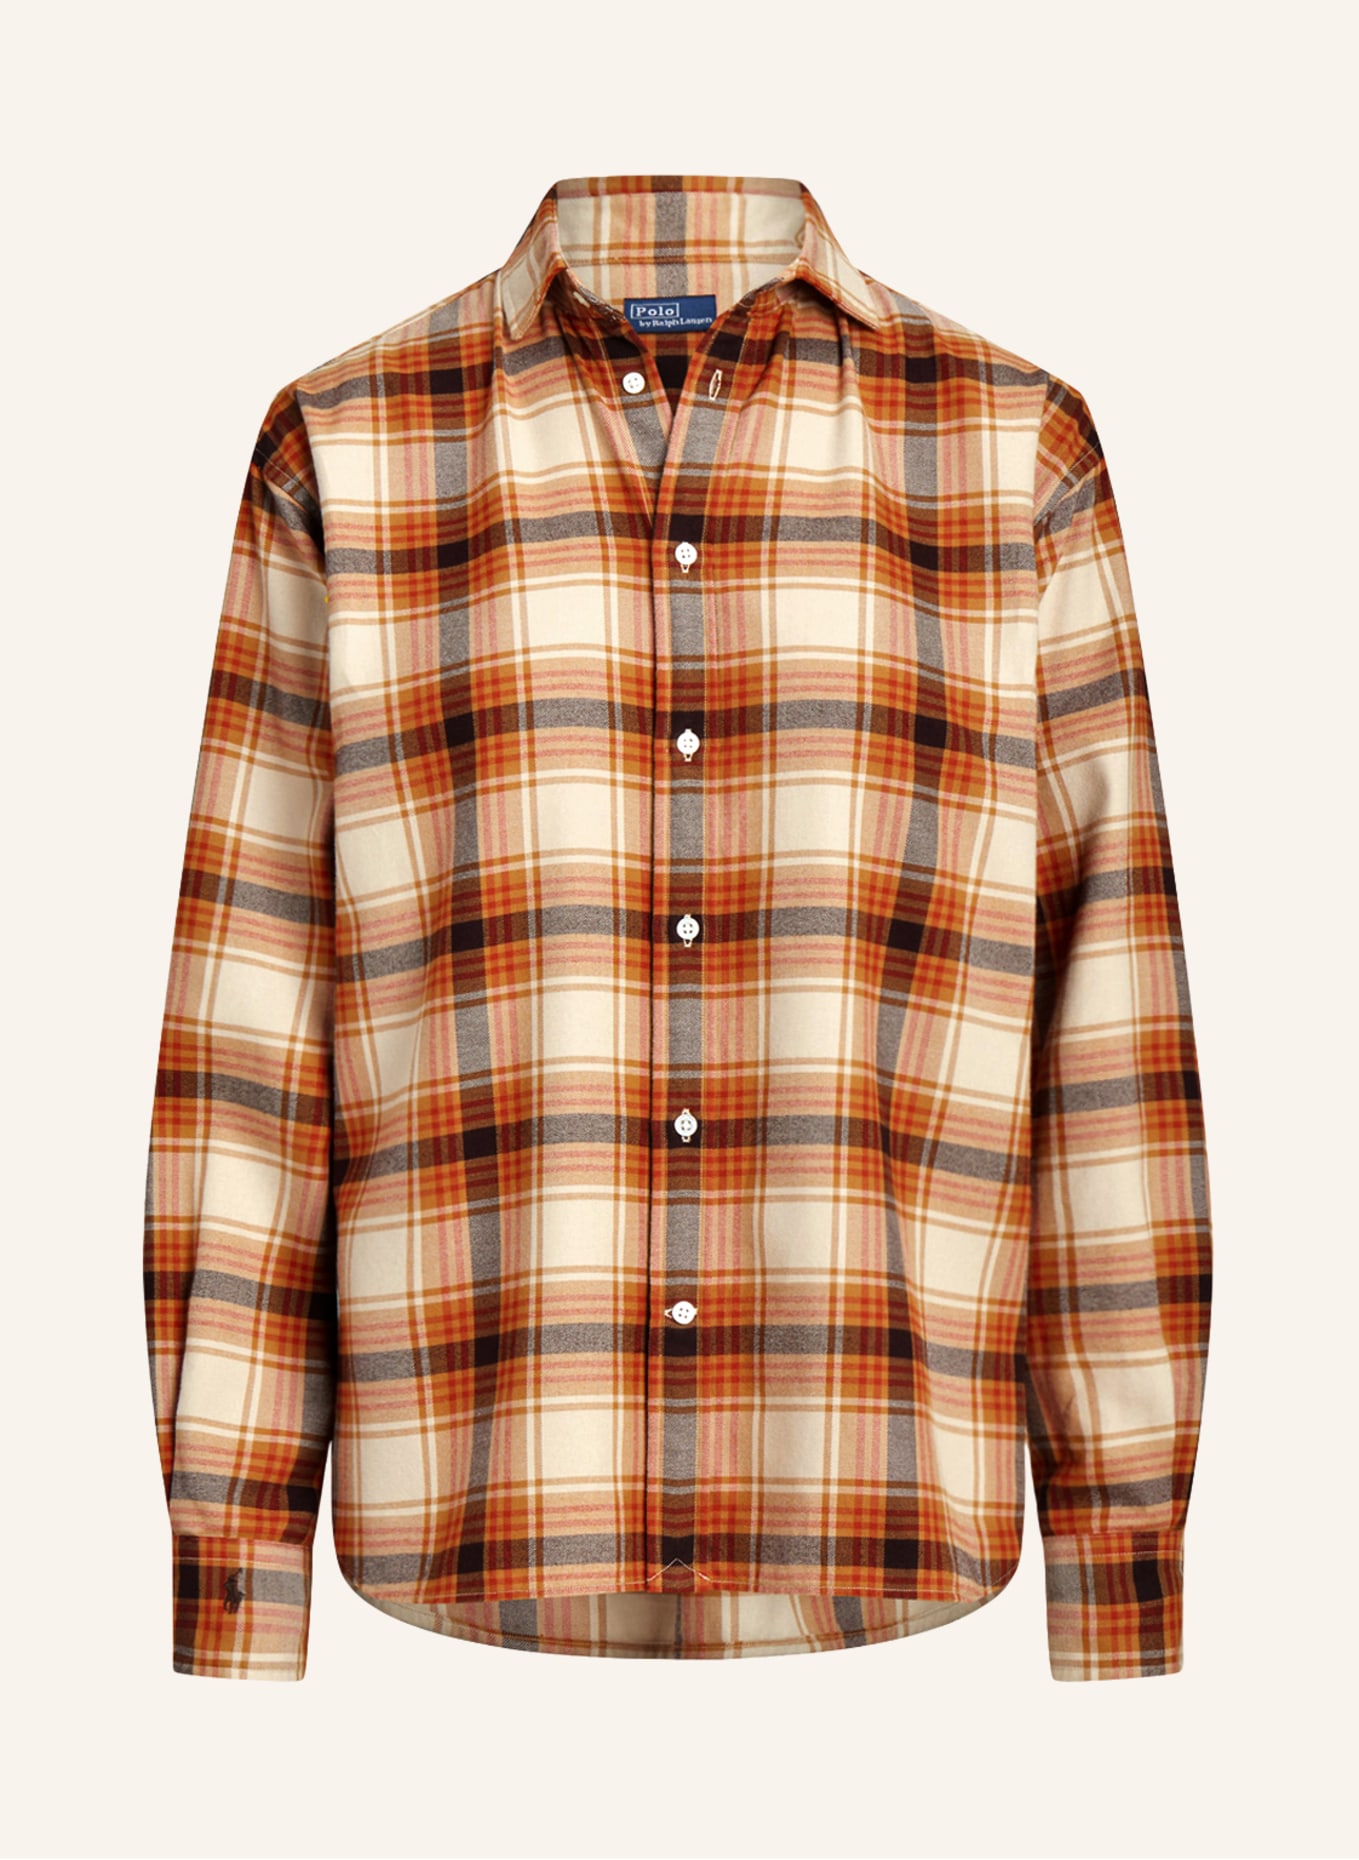 POLO RALPH LAUREN Shirt blouse, Color: LIGHT BROWN/ BROWN/ RED (Image 1)